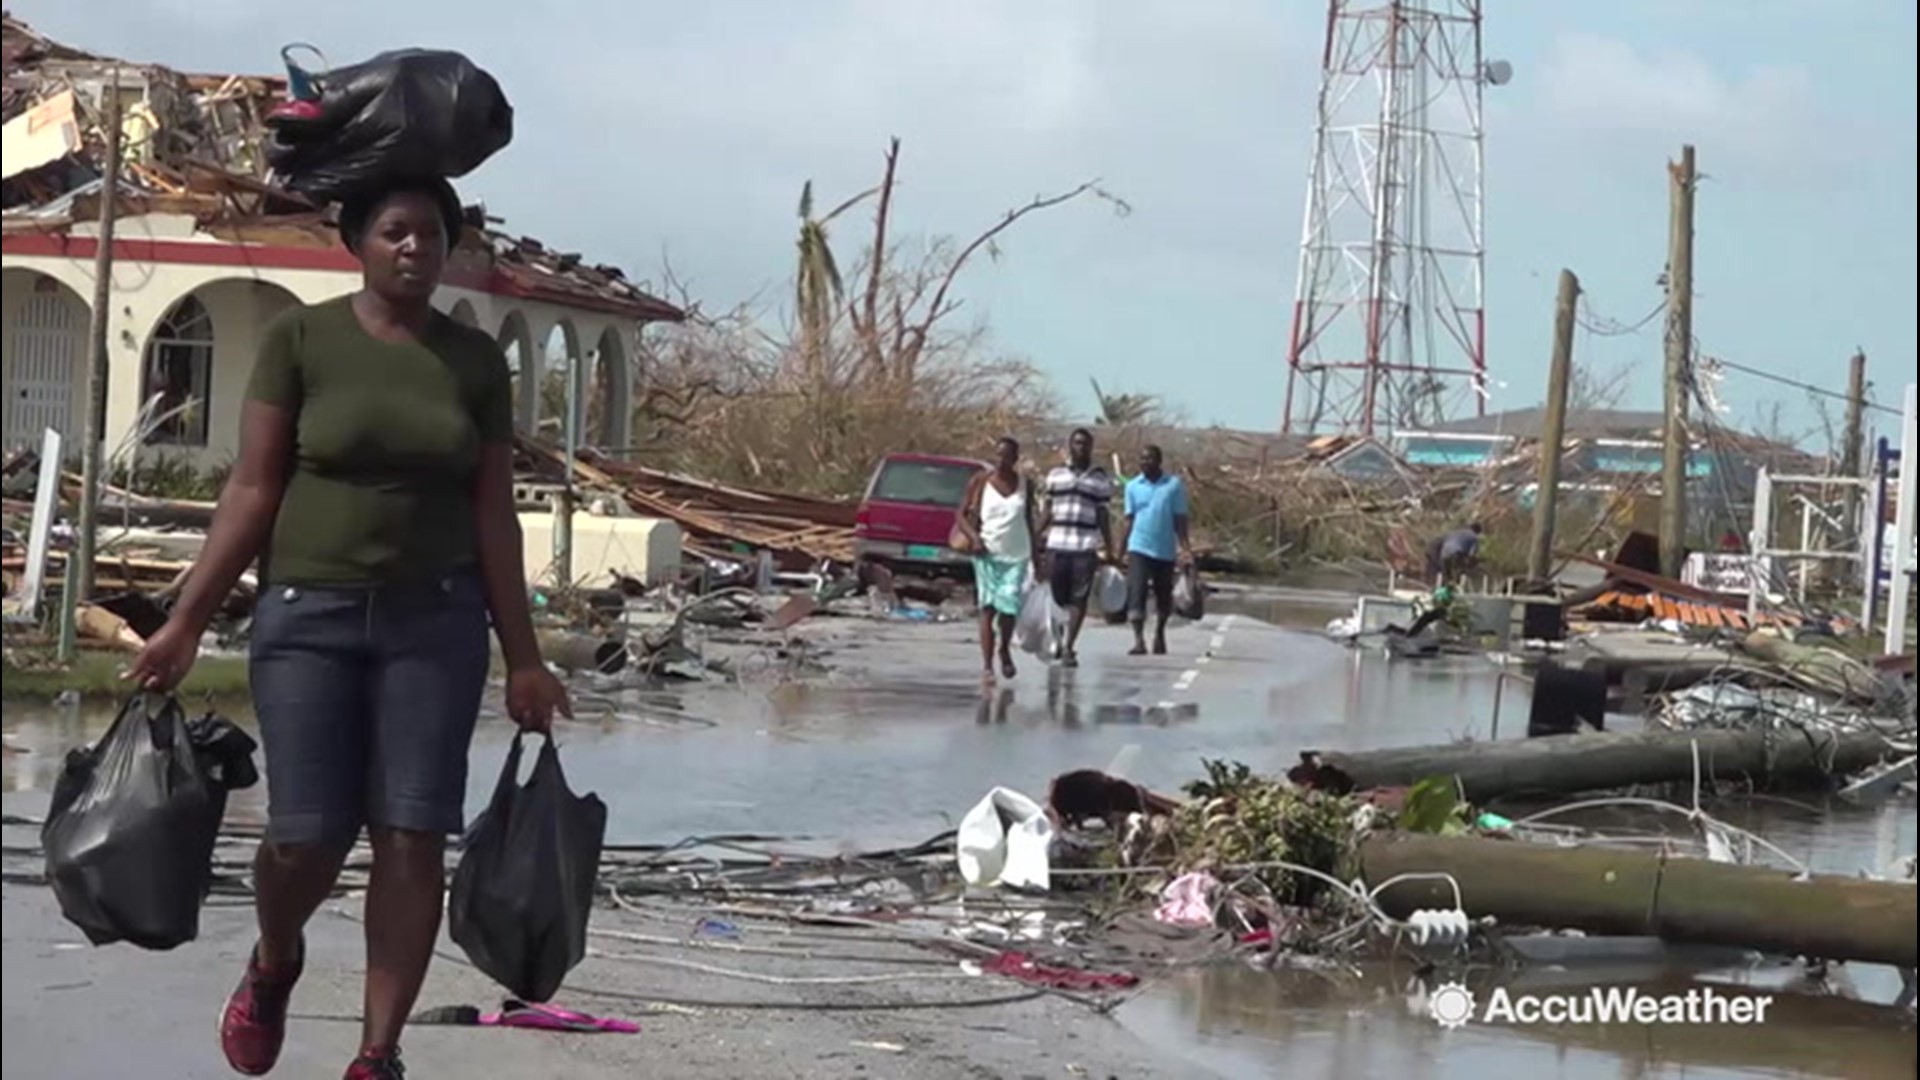 A large Haitian immigrant community in Marsh Harbour, Bahamas, was wiped away by storm surge during Hurricane Dorian. The death toll is rising and so are tempers as the situation becomes more desperate with food and water running low.